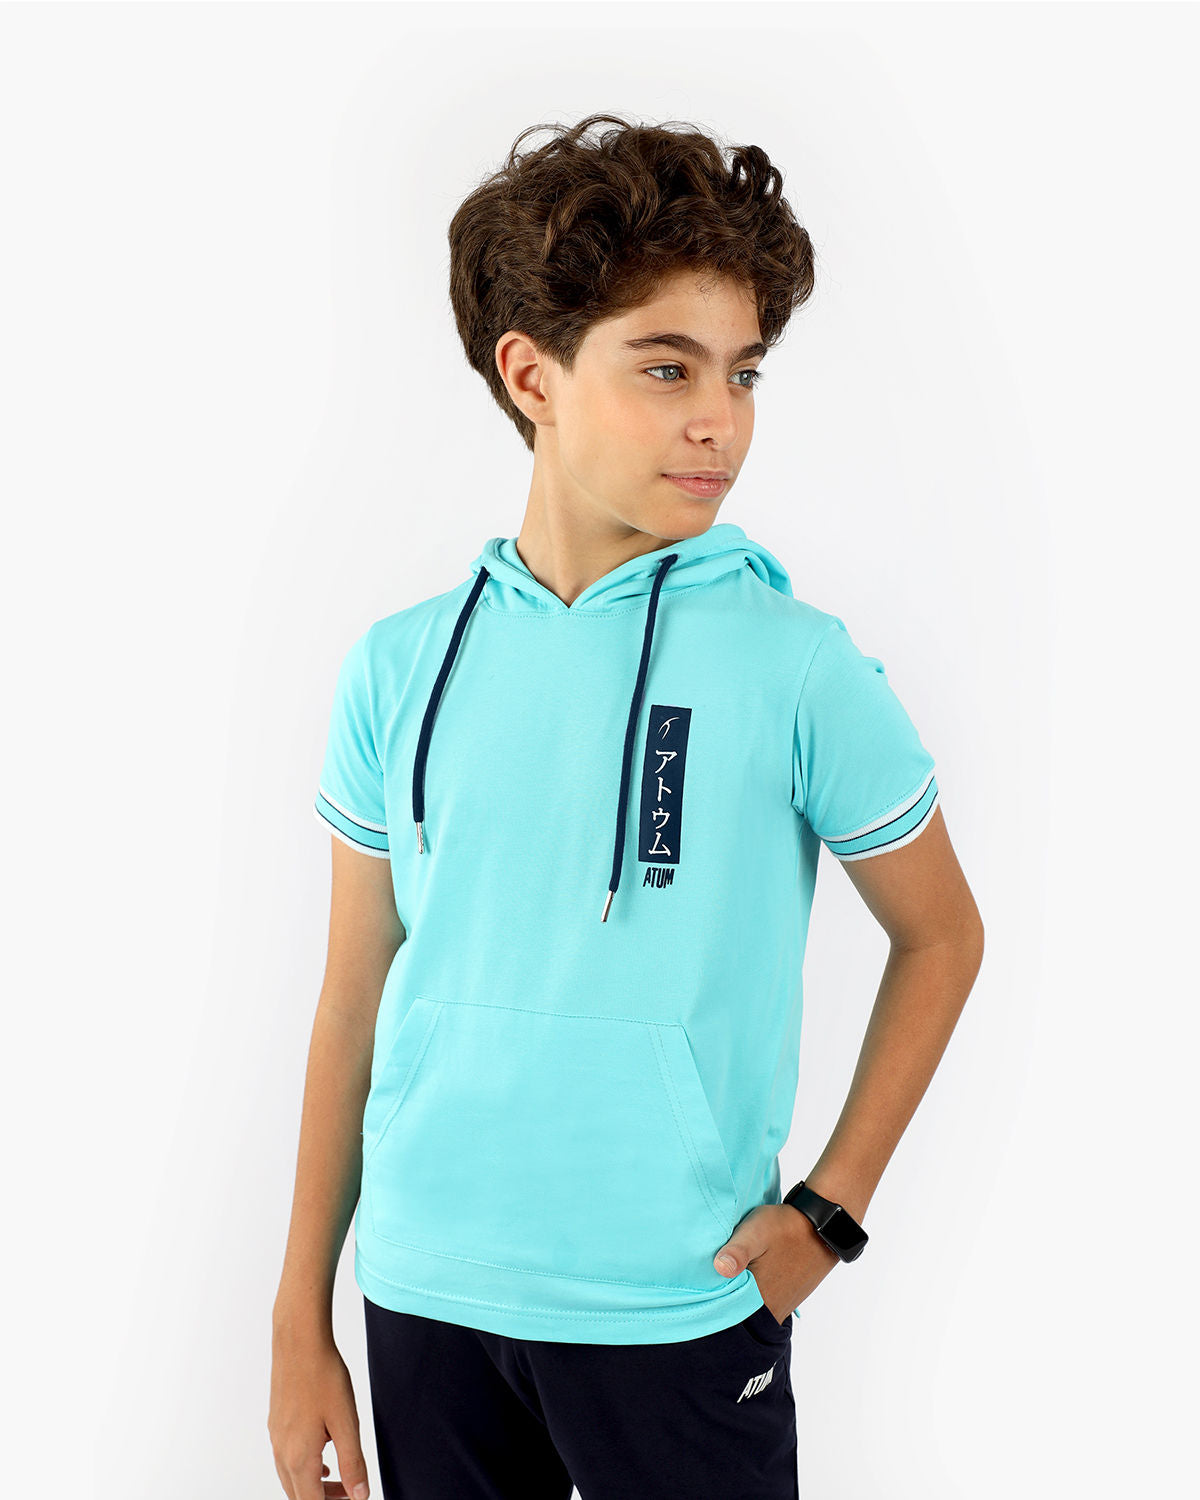 Photo by 𝗔𝗧𝗨𝗠 SPORTSWEAR ® on December 20, 2022. May be an image of 1 boy wears a blue t-shirt and a text said '' Atum''.